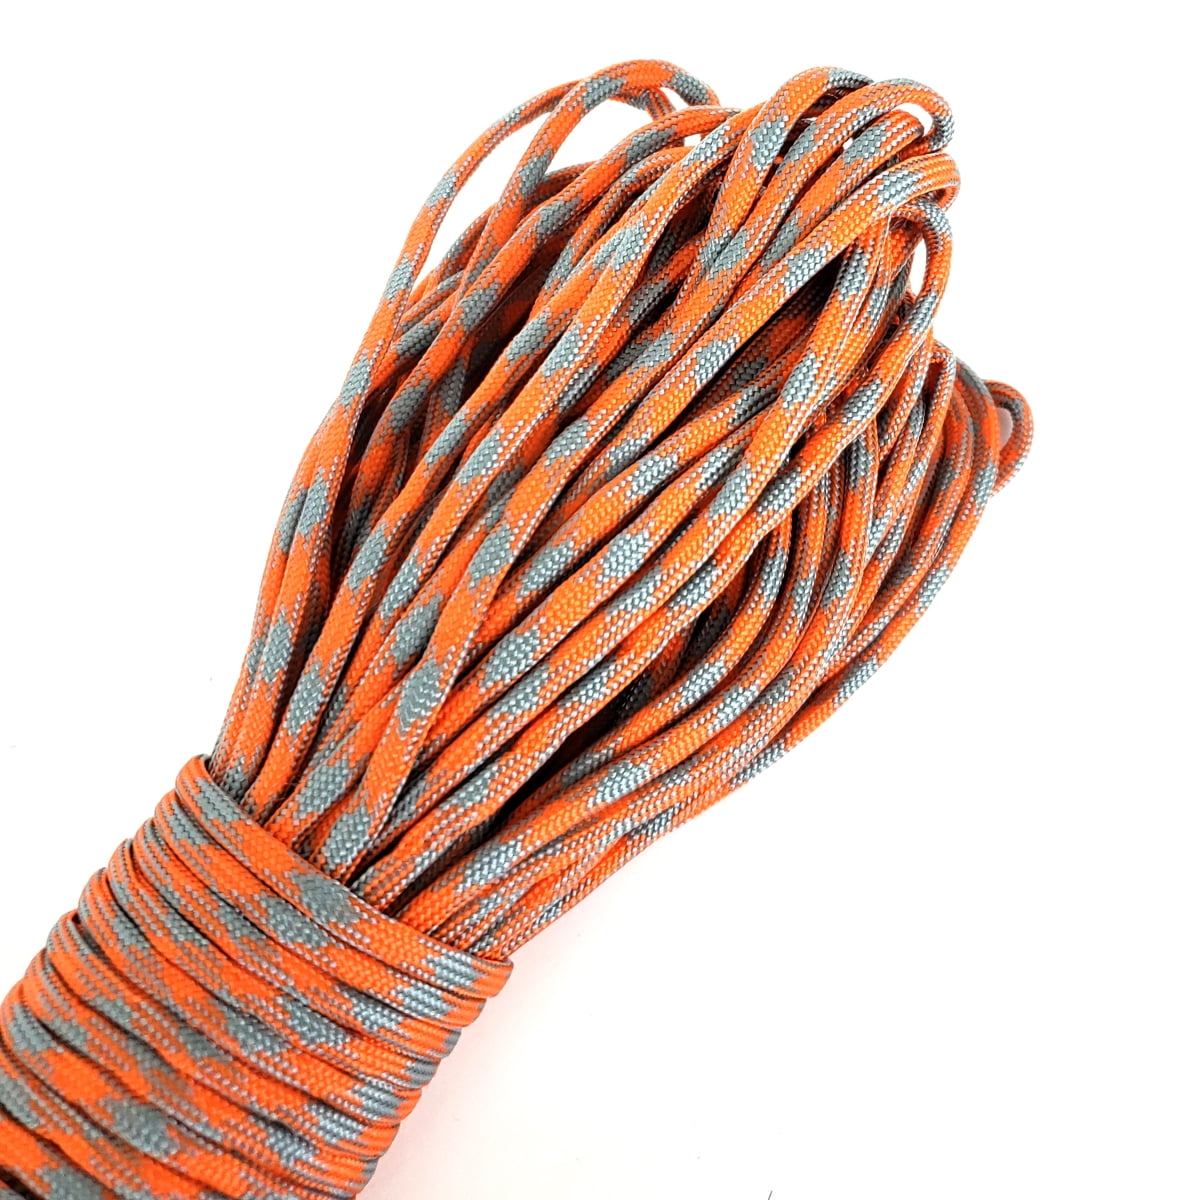 Sirius Survival 100ft Paracord Rope, 350lb Test, 4mm 7 Strand Core - Many  Color Options - Grey/Orange